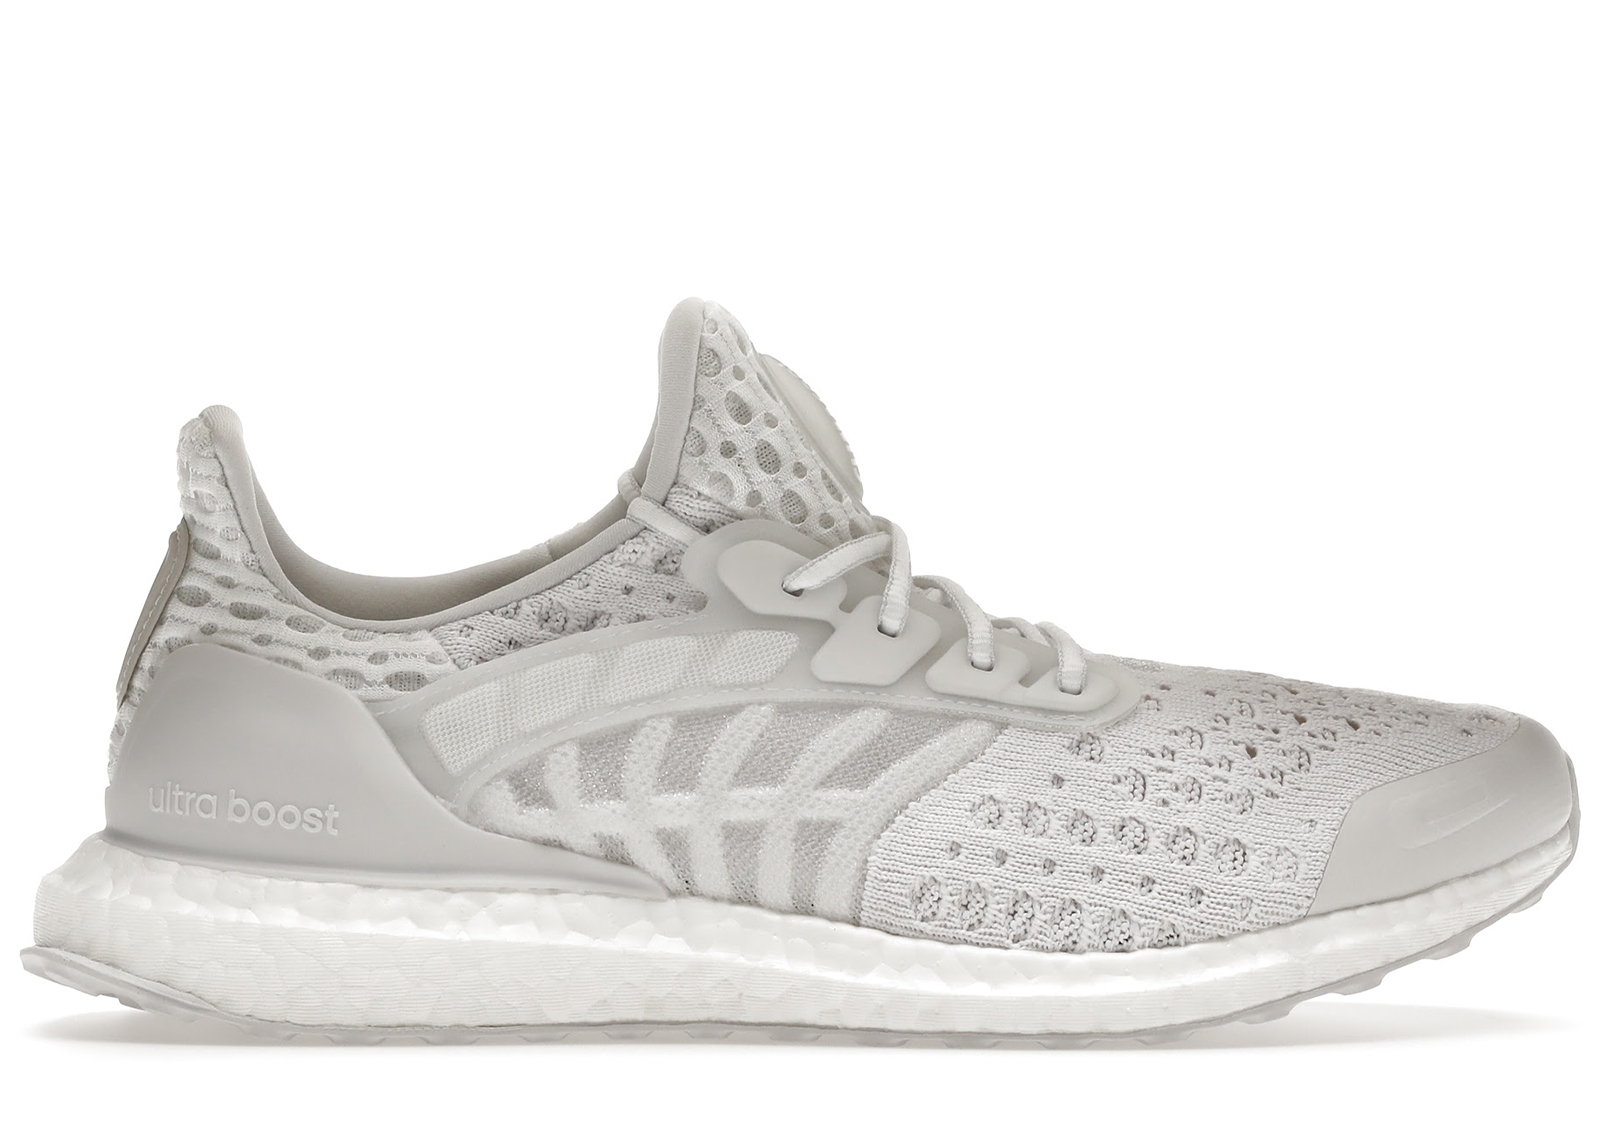 adidas Ultra Boost Climacool 2 DNA Flow Pack White Men's